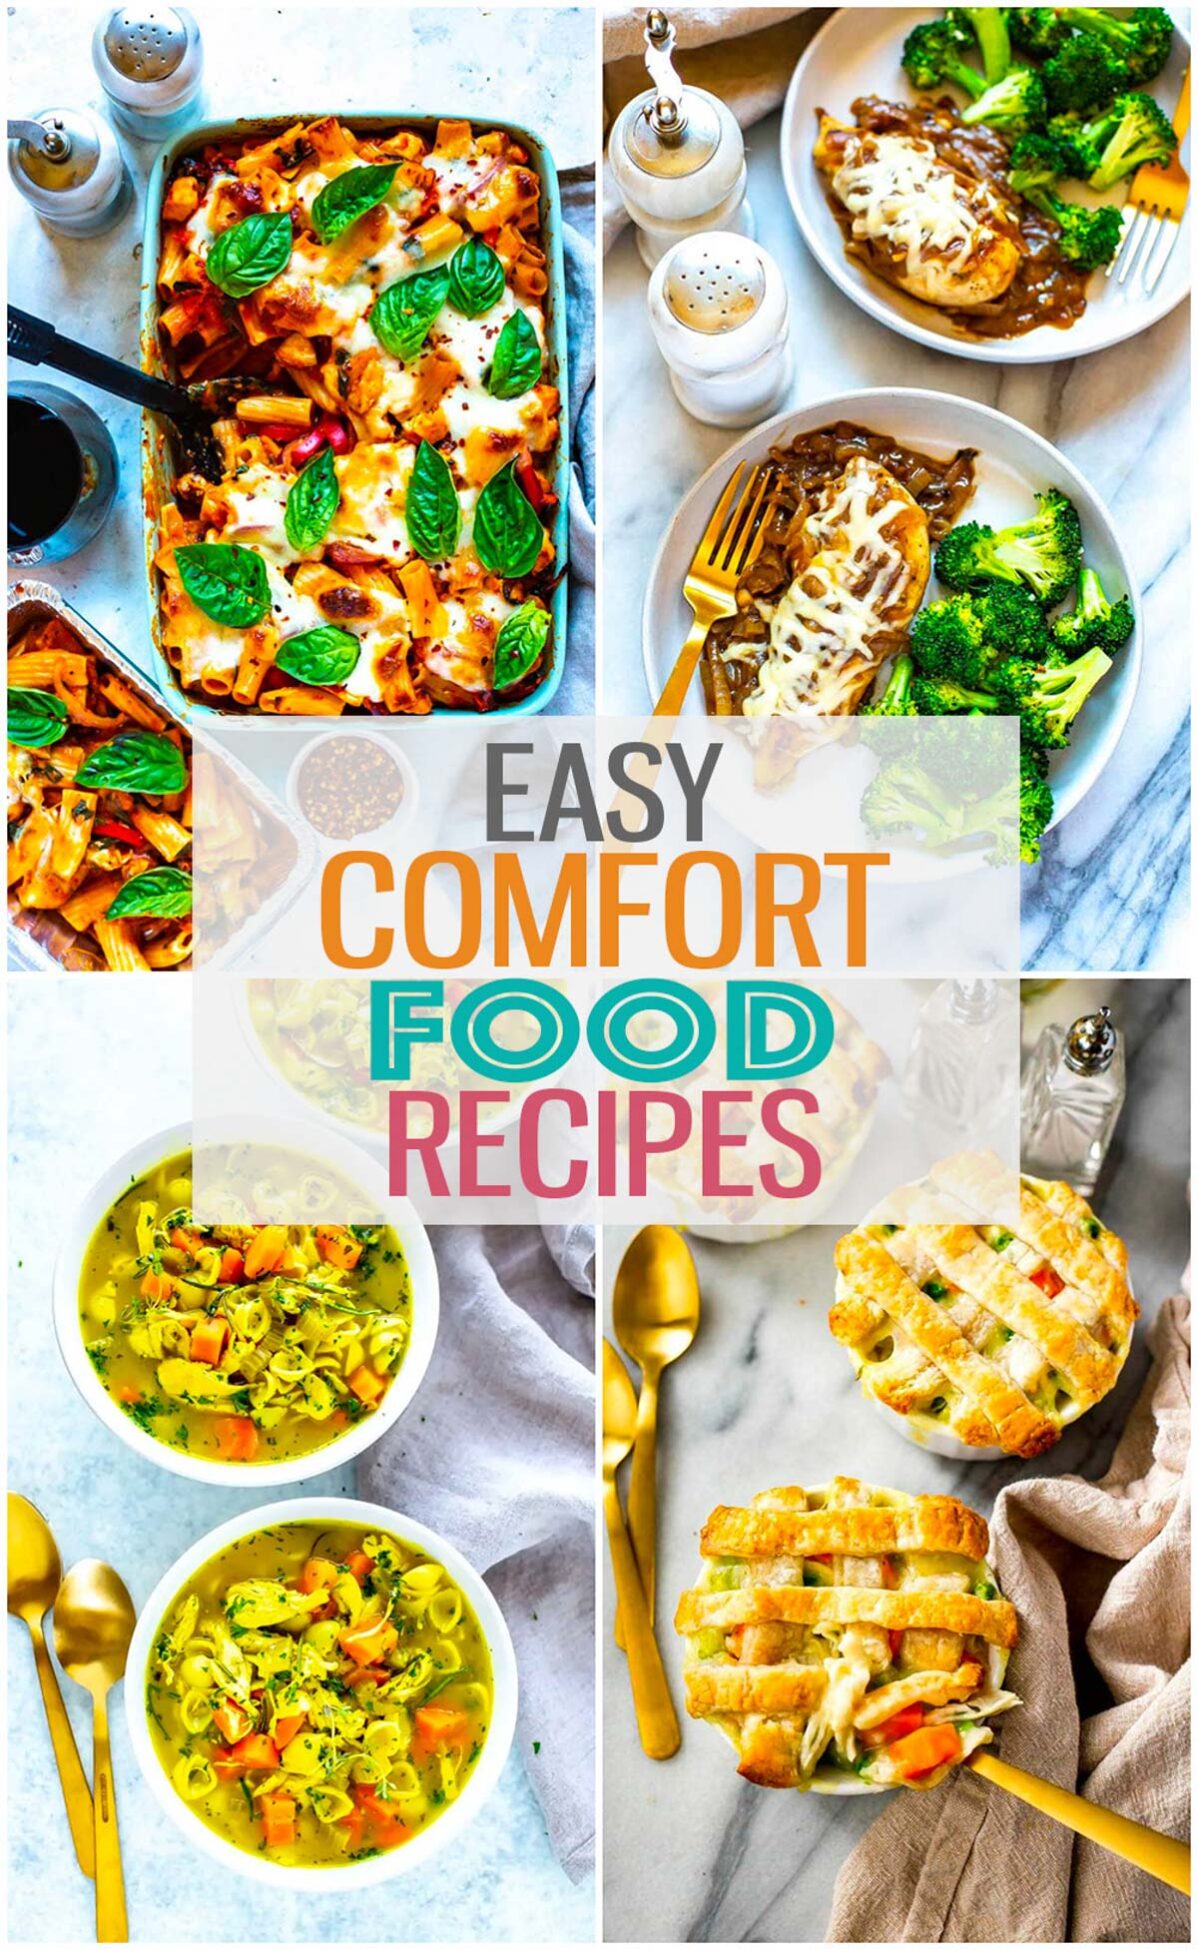 A collage of four different comfort food recipes with the text "Easy Comfort Food Recipes" layered over top.